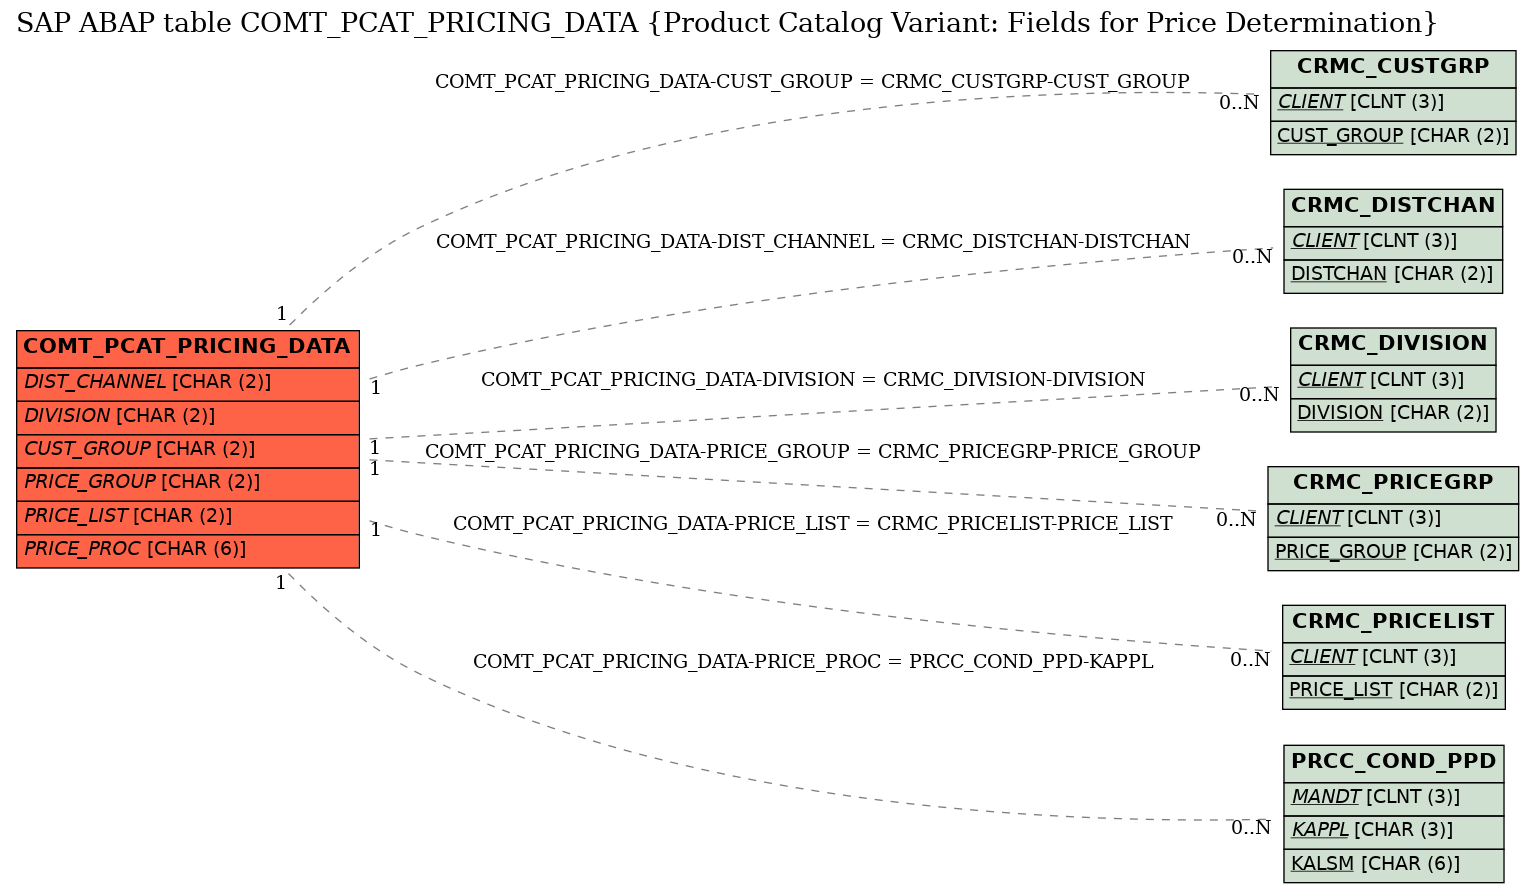 E-R Diagram for table COMT_PCAT_PRICING_DATA (Product Catalog Variant: Fields for Price Determination)